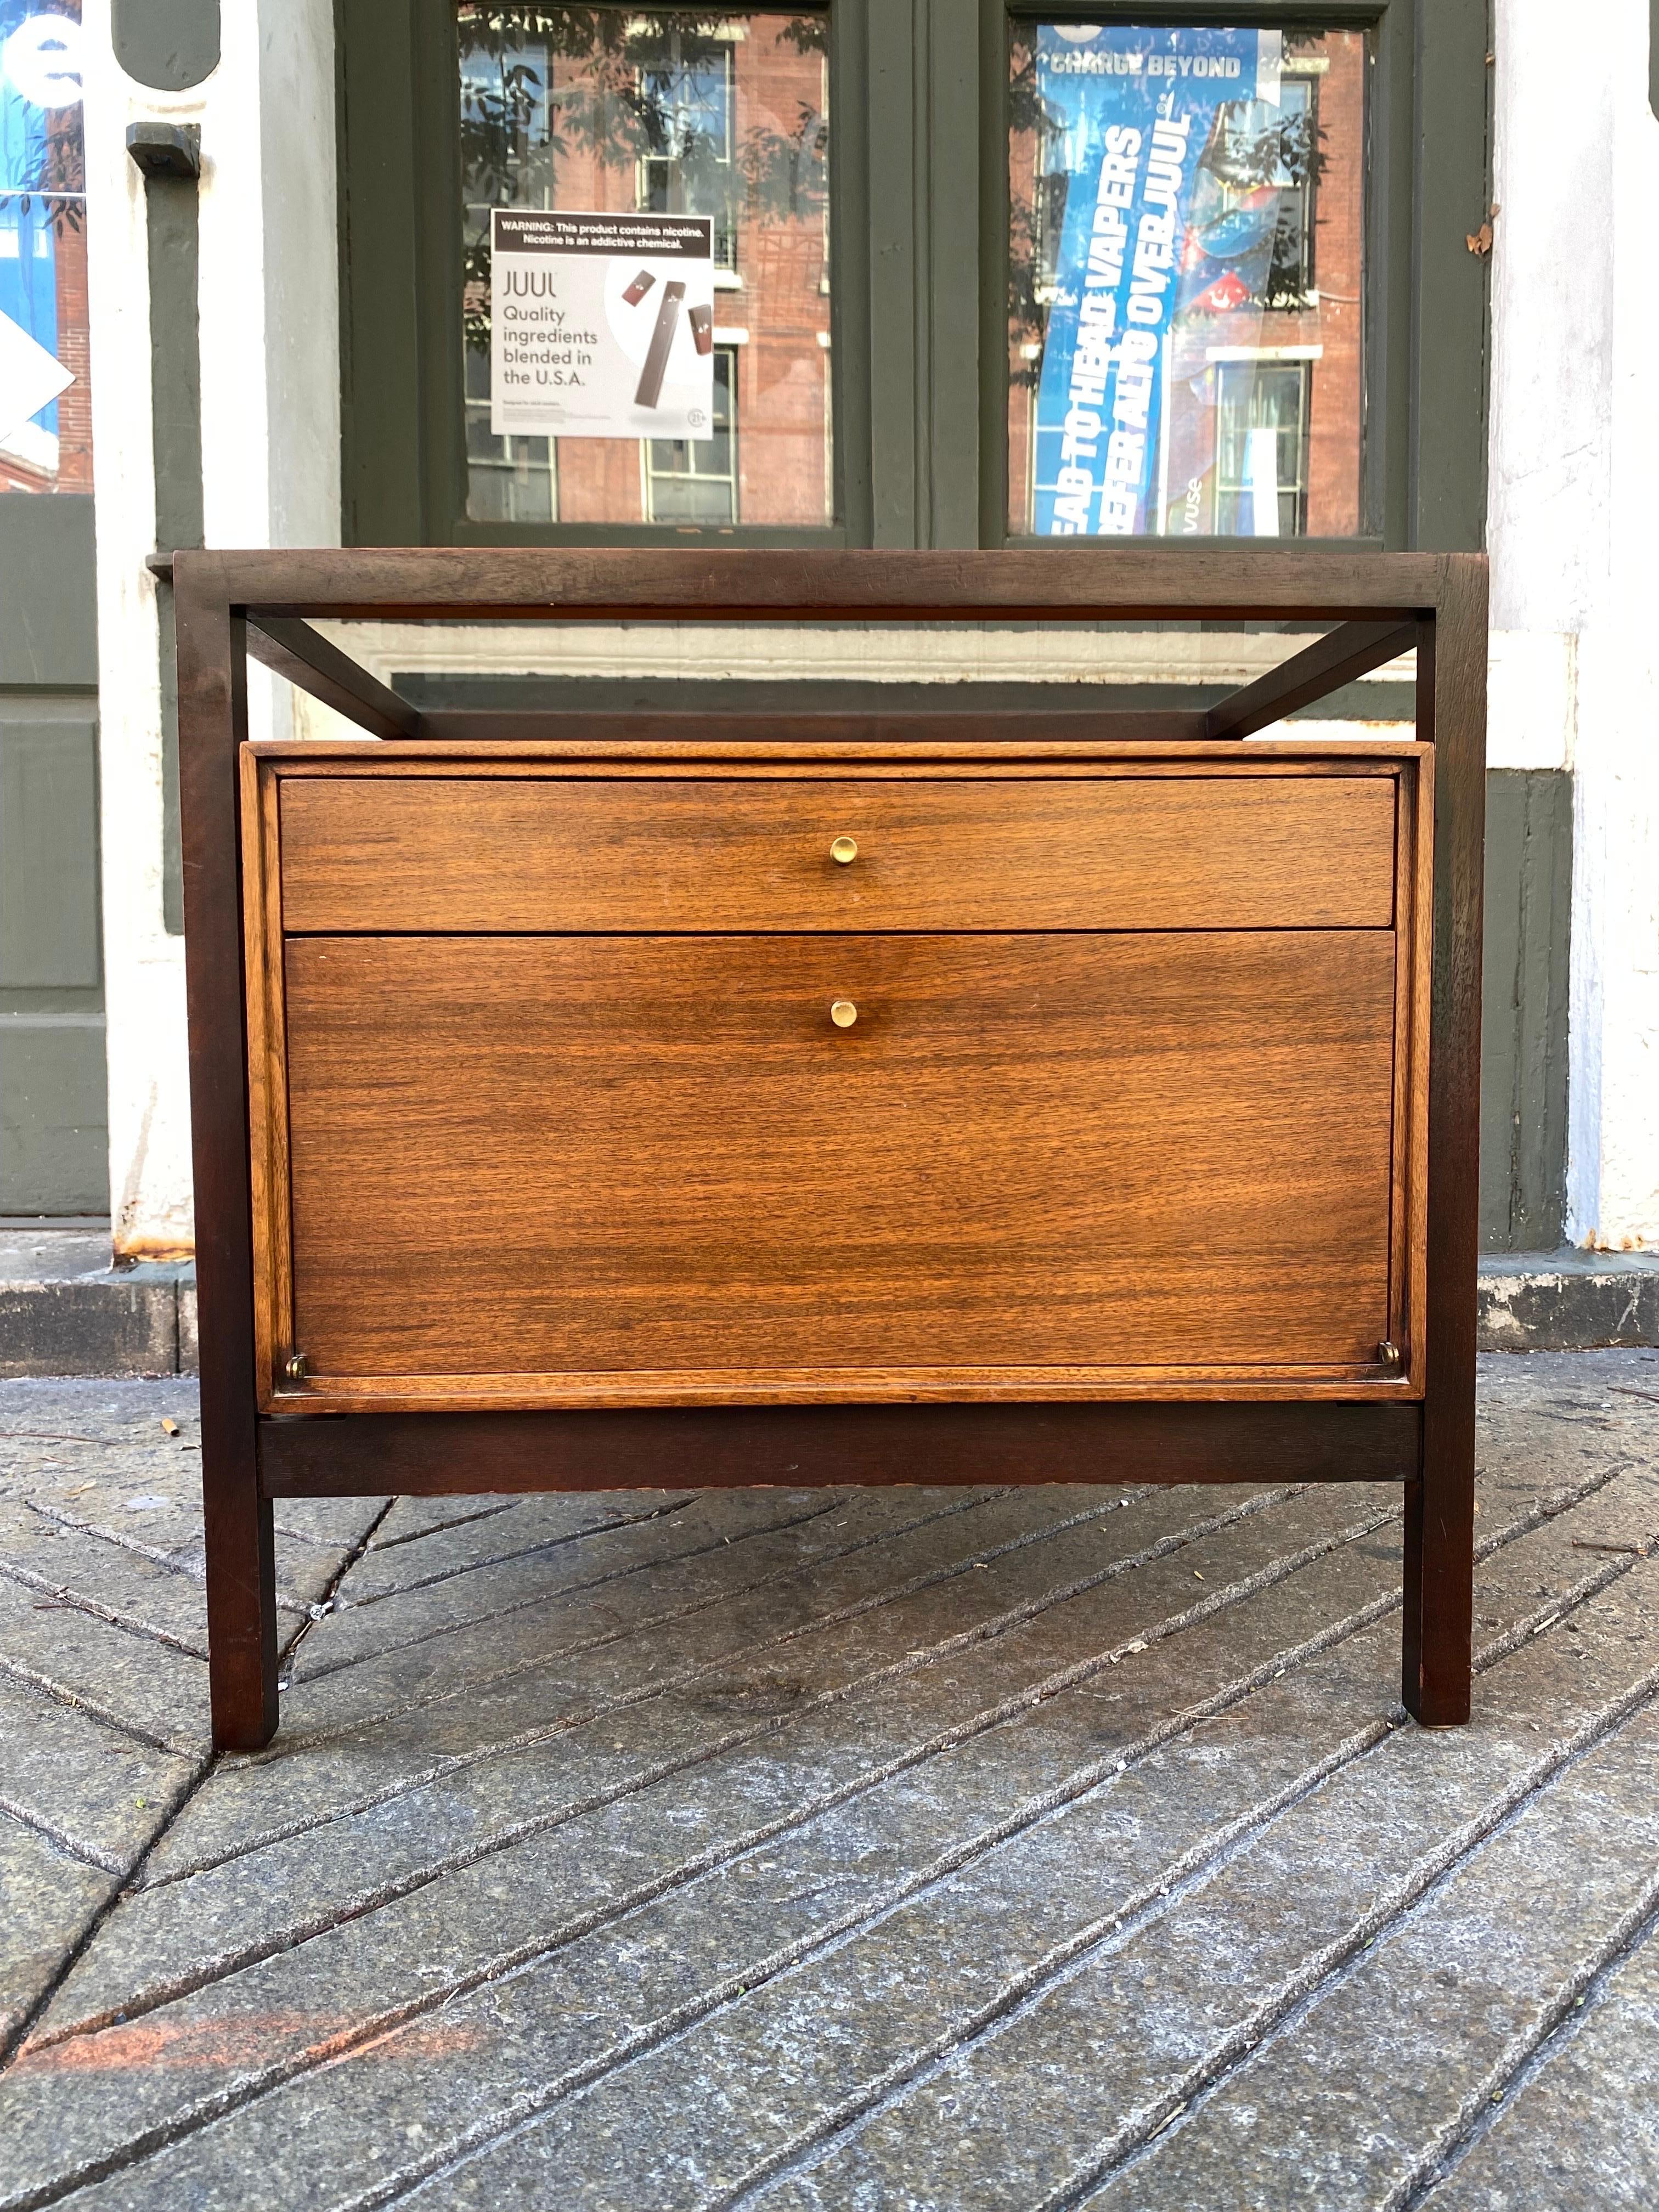 Mount Airy Furniture Company Walnut Nightstand with Glass Top.  One Drawer and one pull down door.  Brass knobs.  Dresser and Desk in separate listings.  Original Clean Condition.